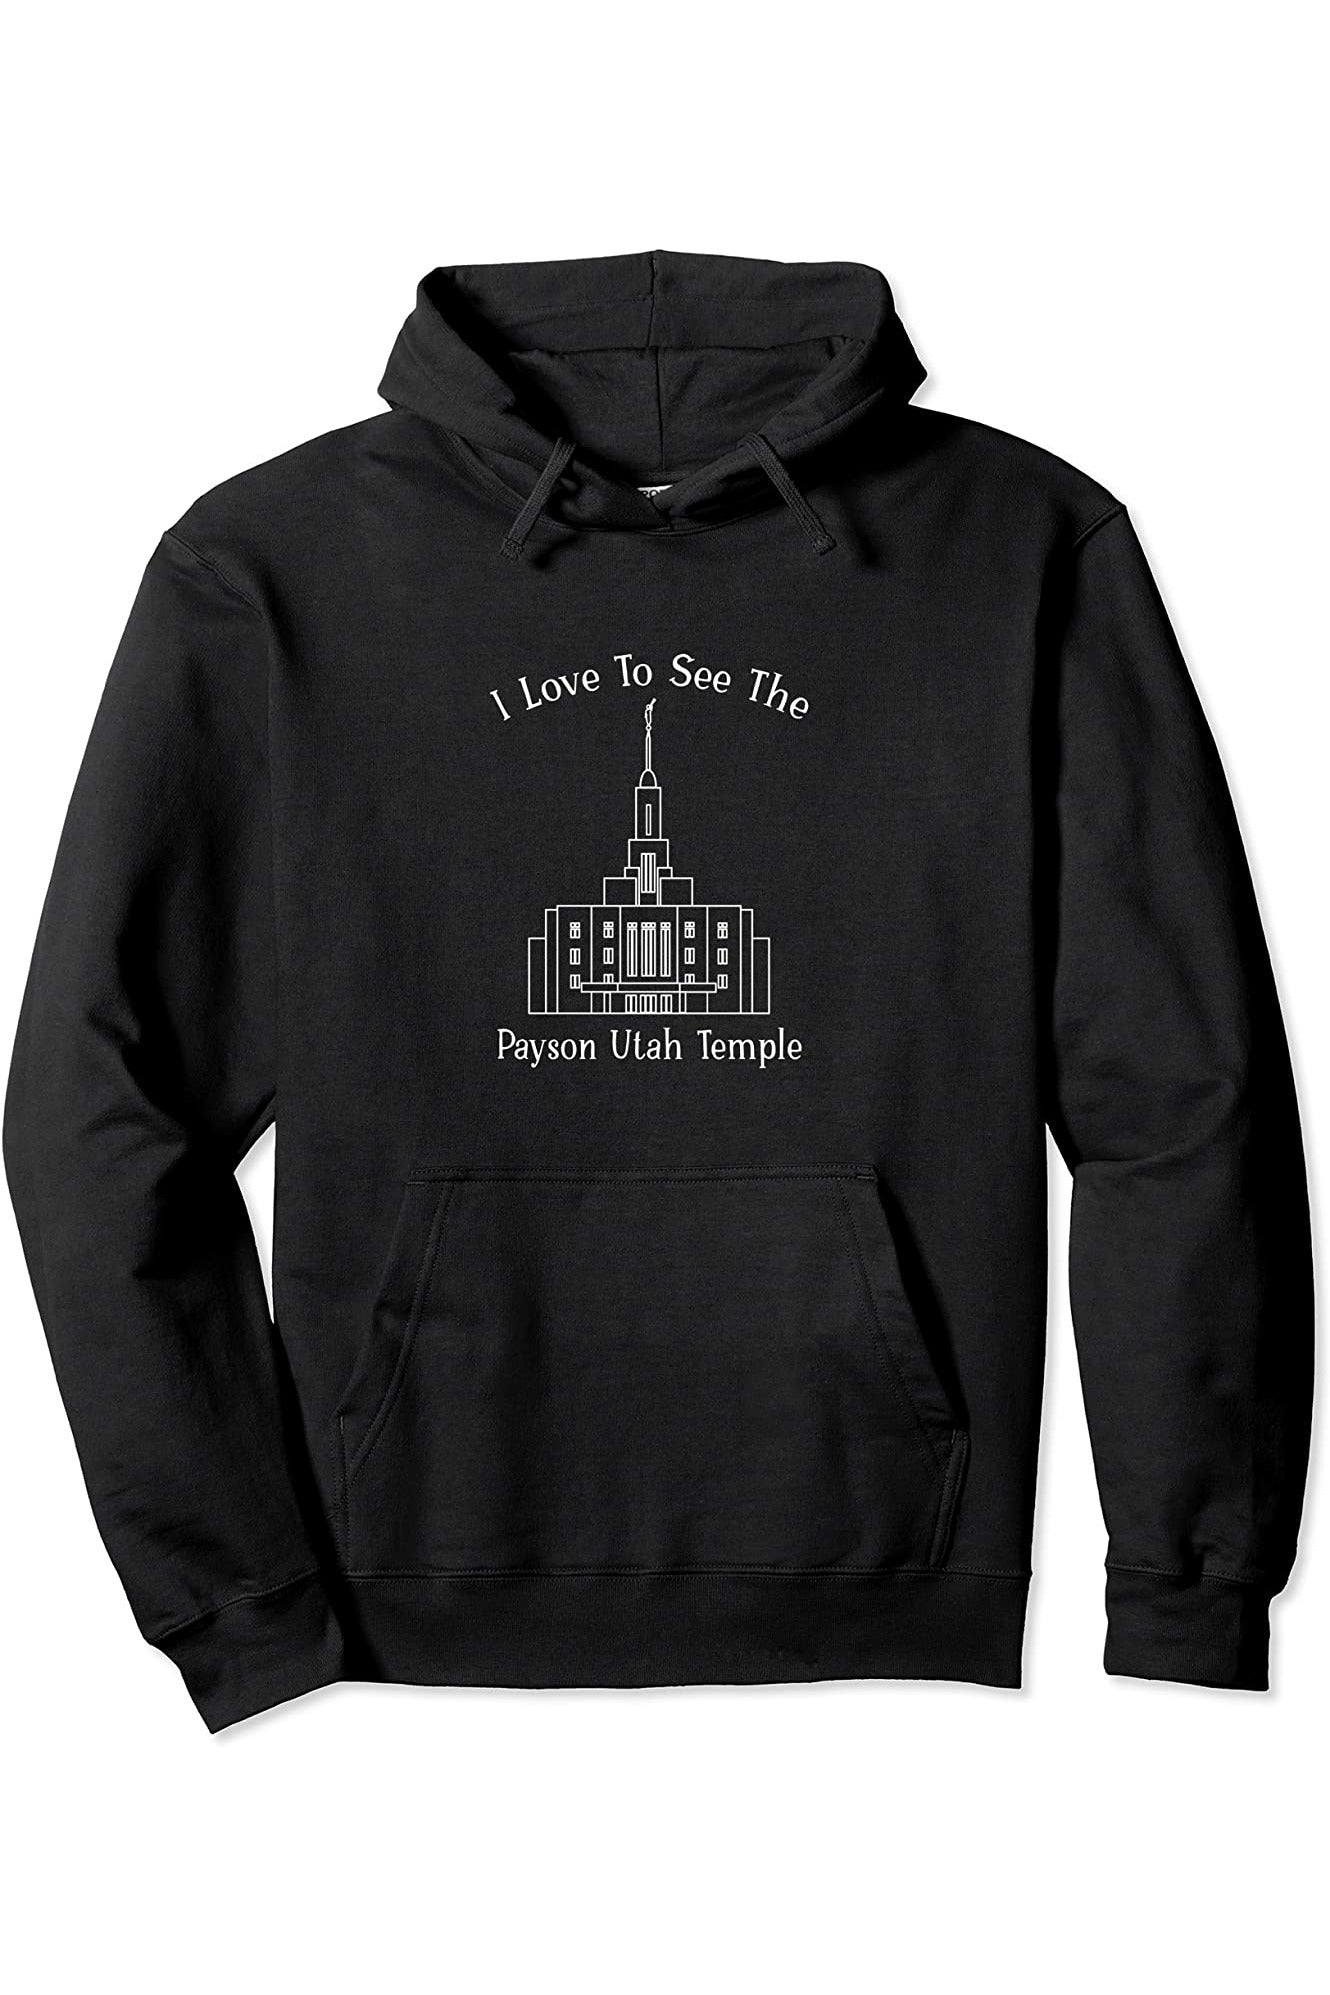 Payson Utah Temple Pullover Hoodie - Happy Style (English) US